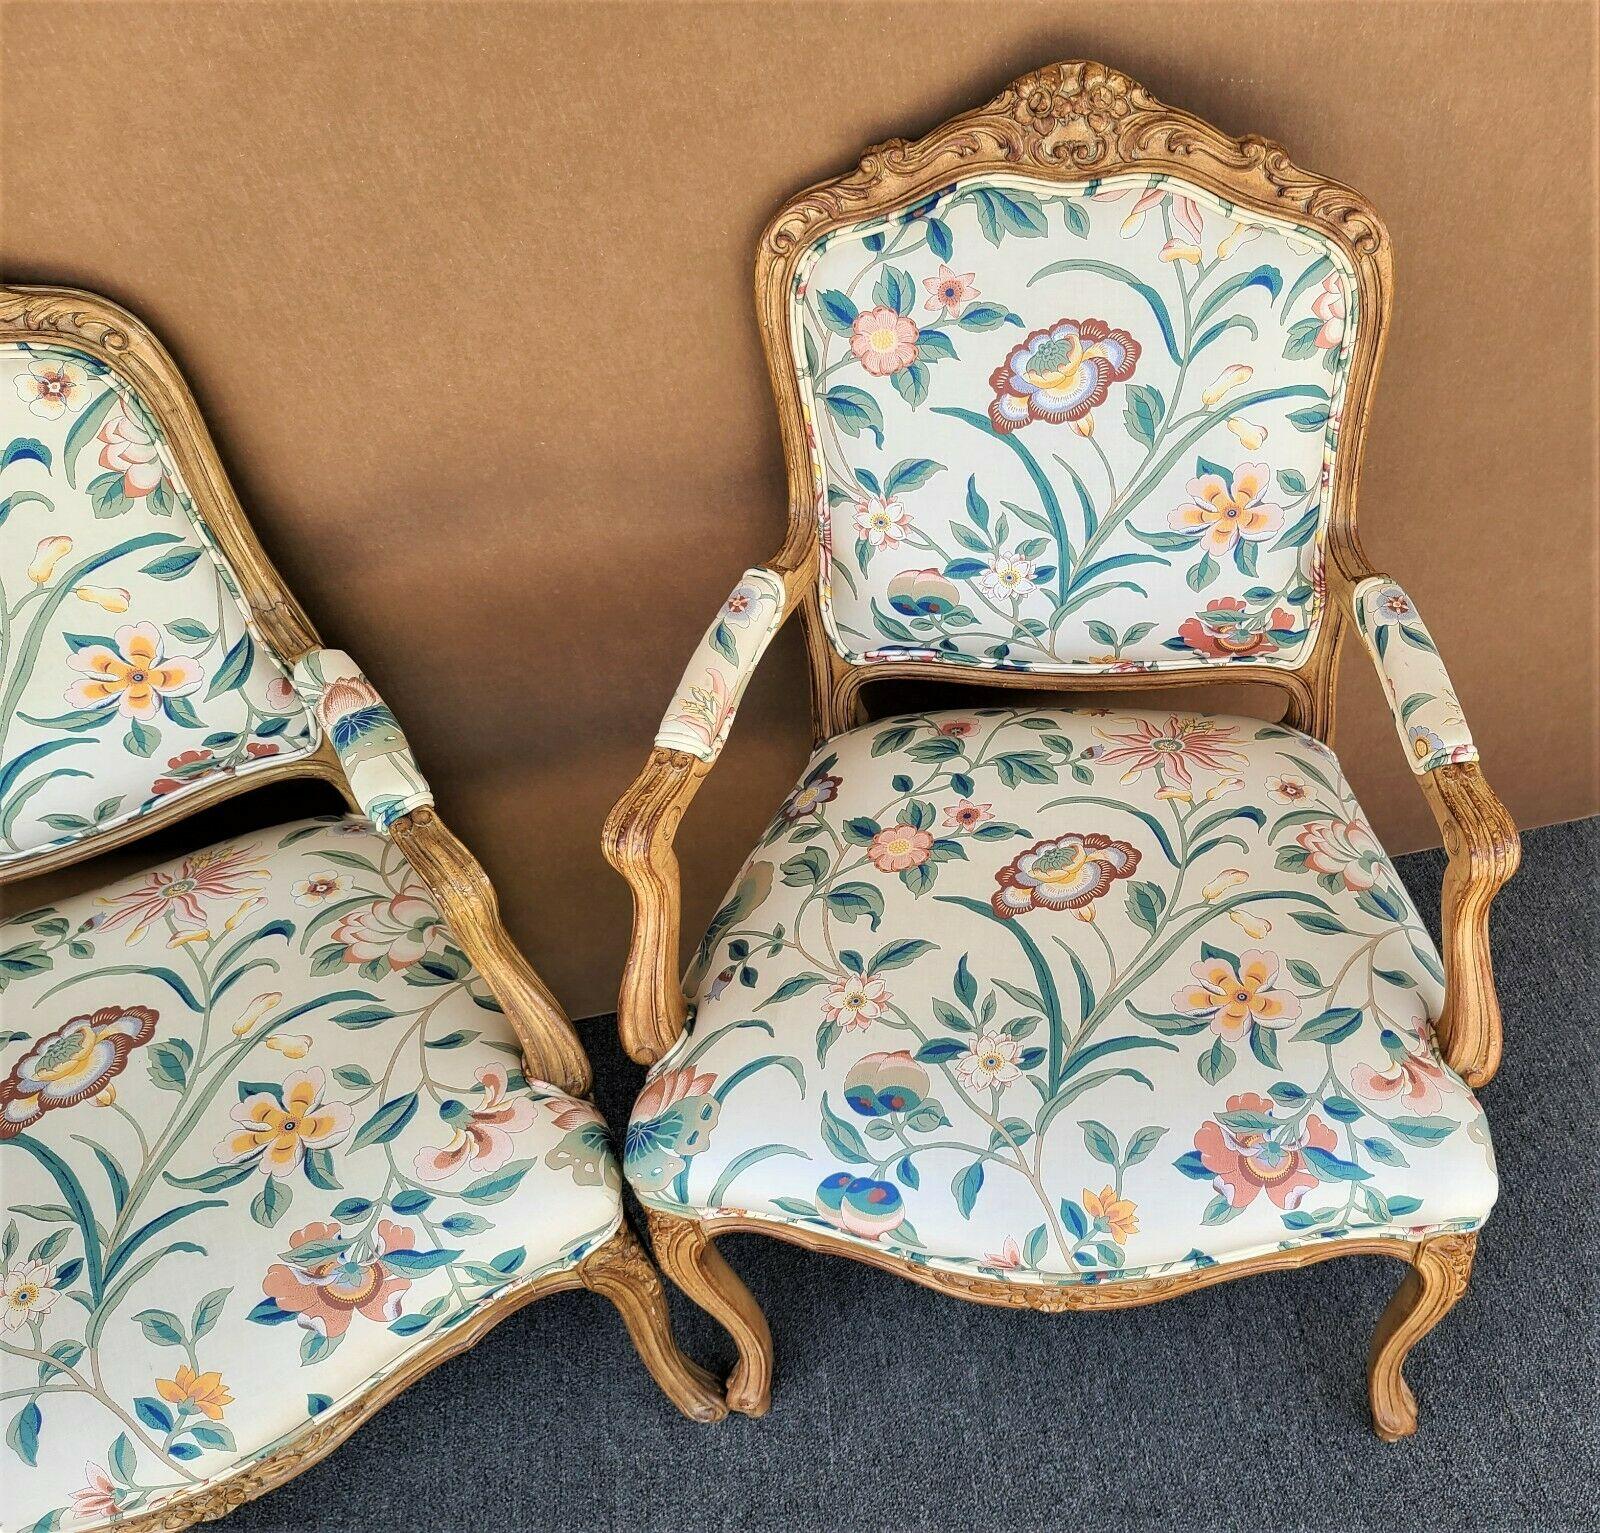 Italian French Provincial Louis XV Armchairs by Chateau d'Ax, Set of 2 For Sale